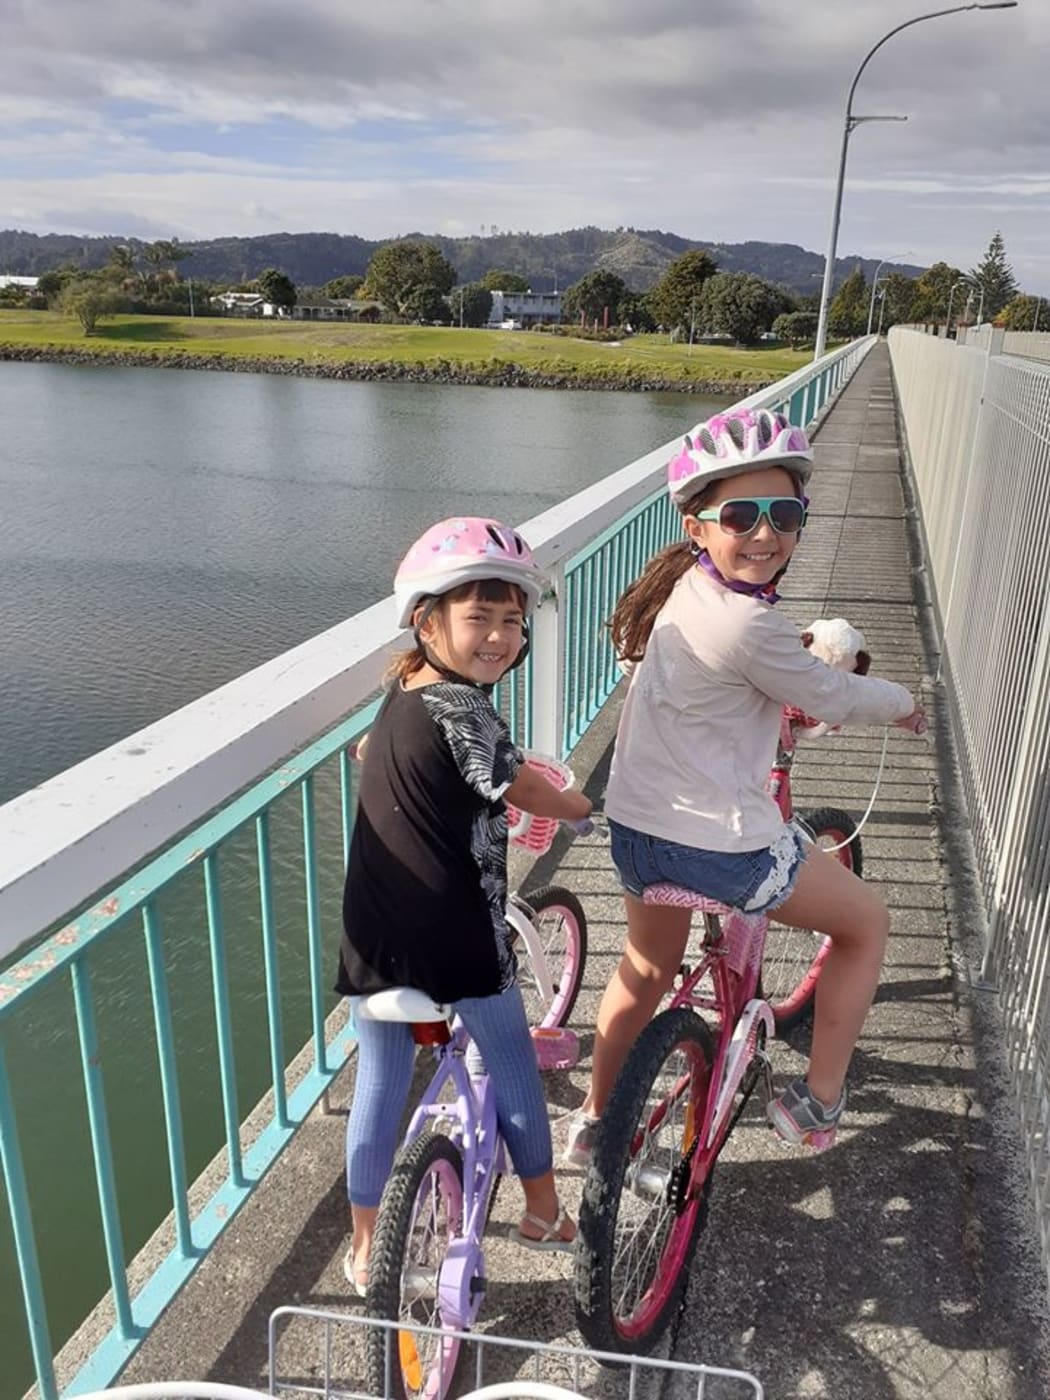 Kara (6) and Kayla (8) Jones are some of many who have enjoyed cycling through Whakatane's safer streets during the nationwide Covid-19 lockdown.